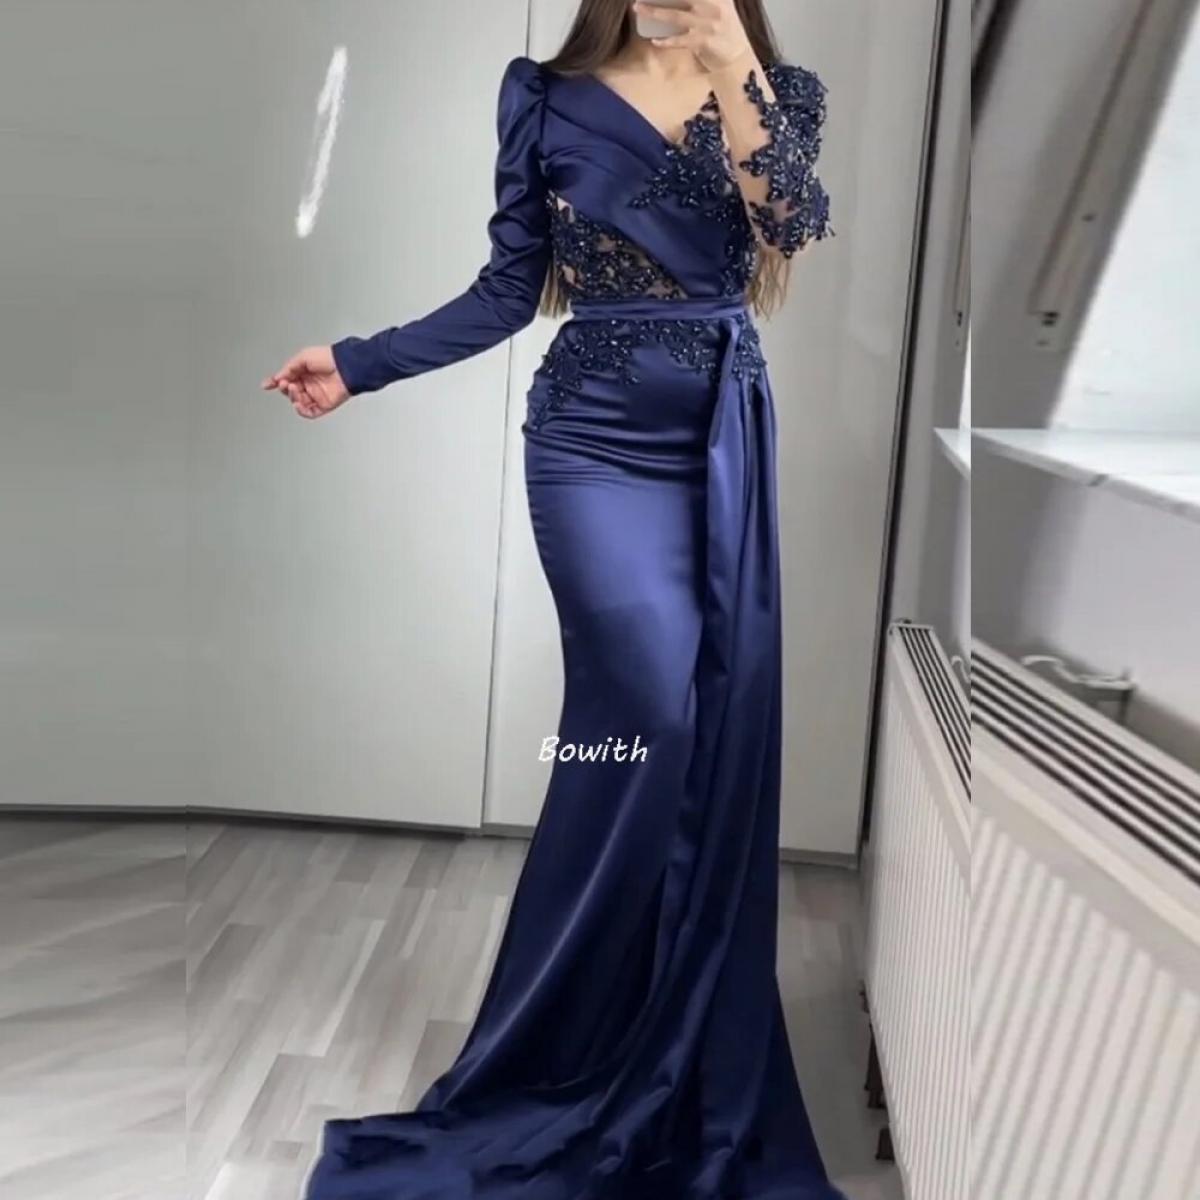 Beads Mermaid Evening Dress For Women Formal Party Dresses Long Sleeves Prom Gowns Embroidery Formal Occasion Dresses Ve